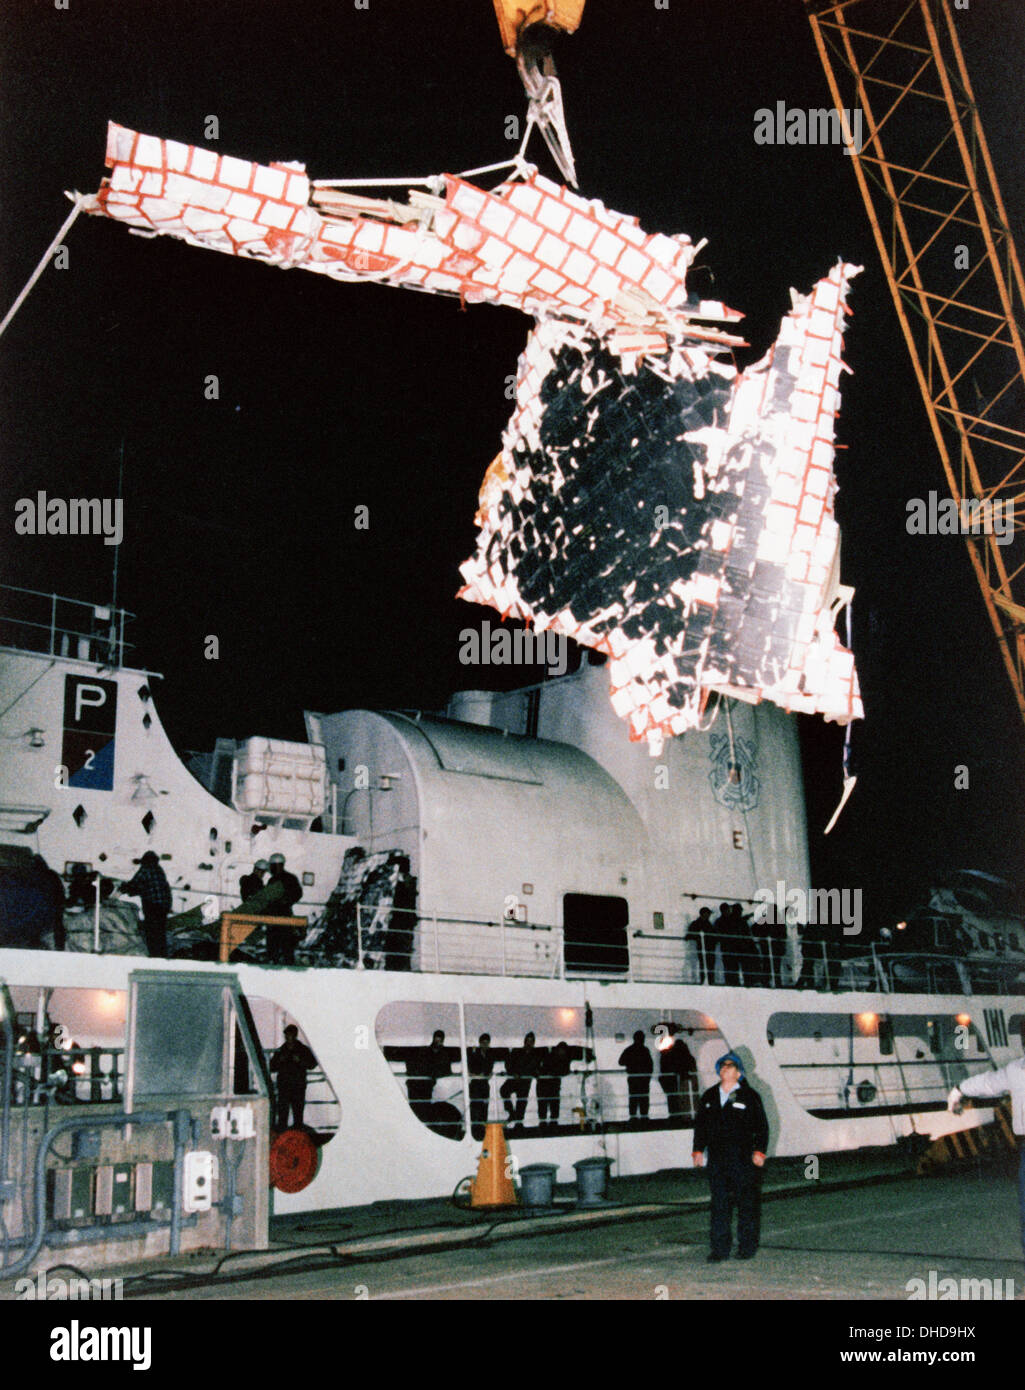 Wreckage from the space shuttle Challenger, STS-51L mission Stock Photo: 62373190 - Alamy